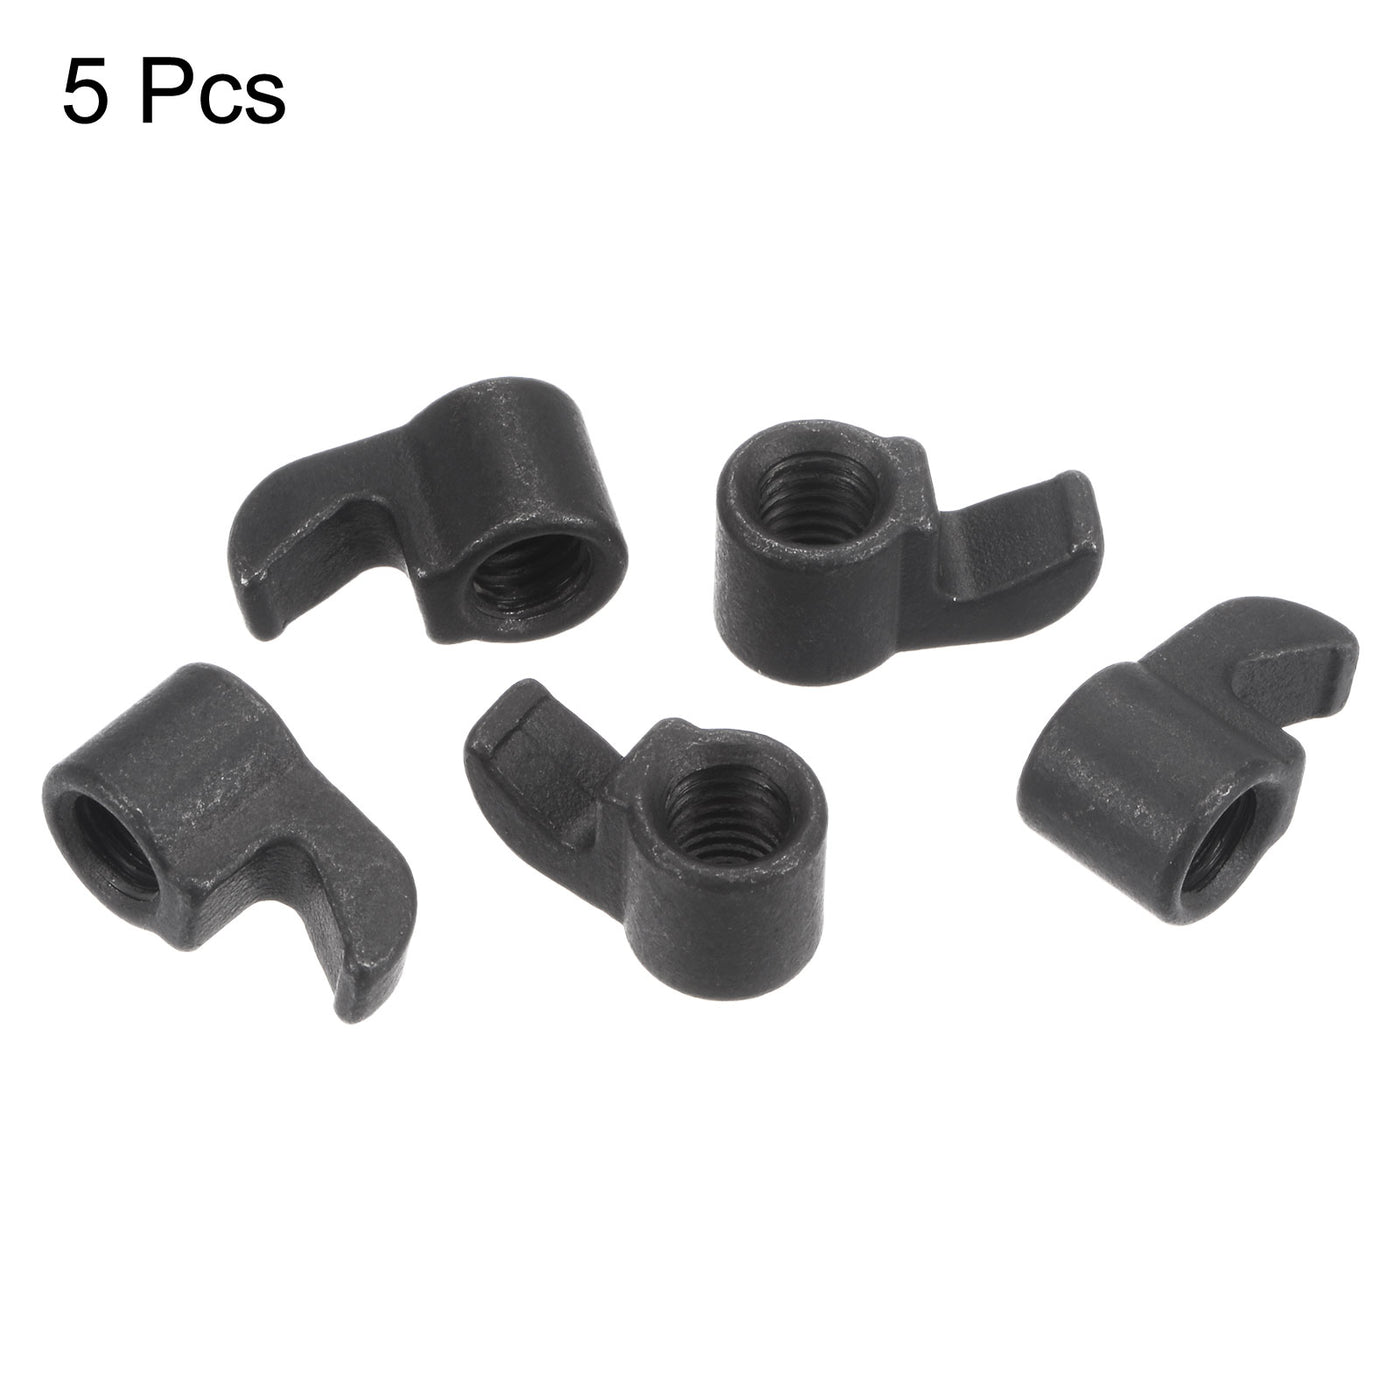 uxcell Uxcell M6-1.0 Inserts Plate Finger Clamp Fit for CNC Lathe Turning Tool, 5Pcs